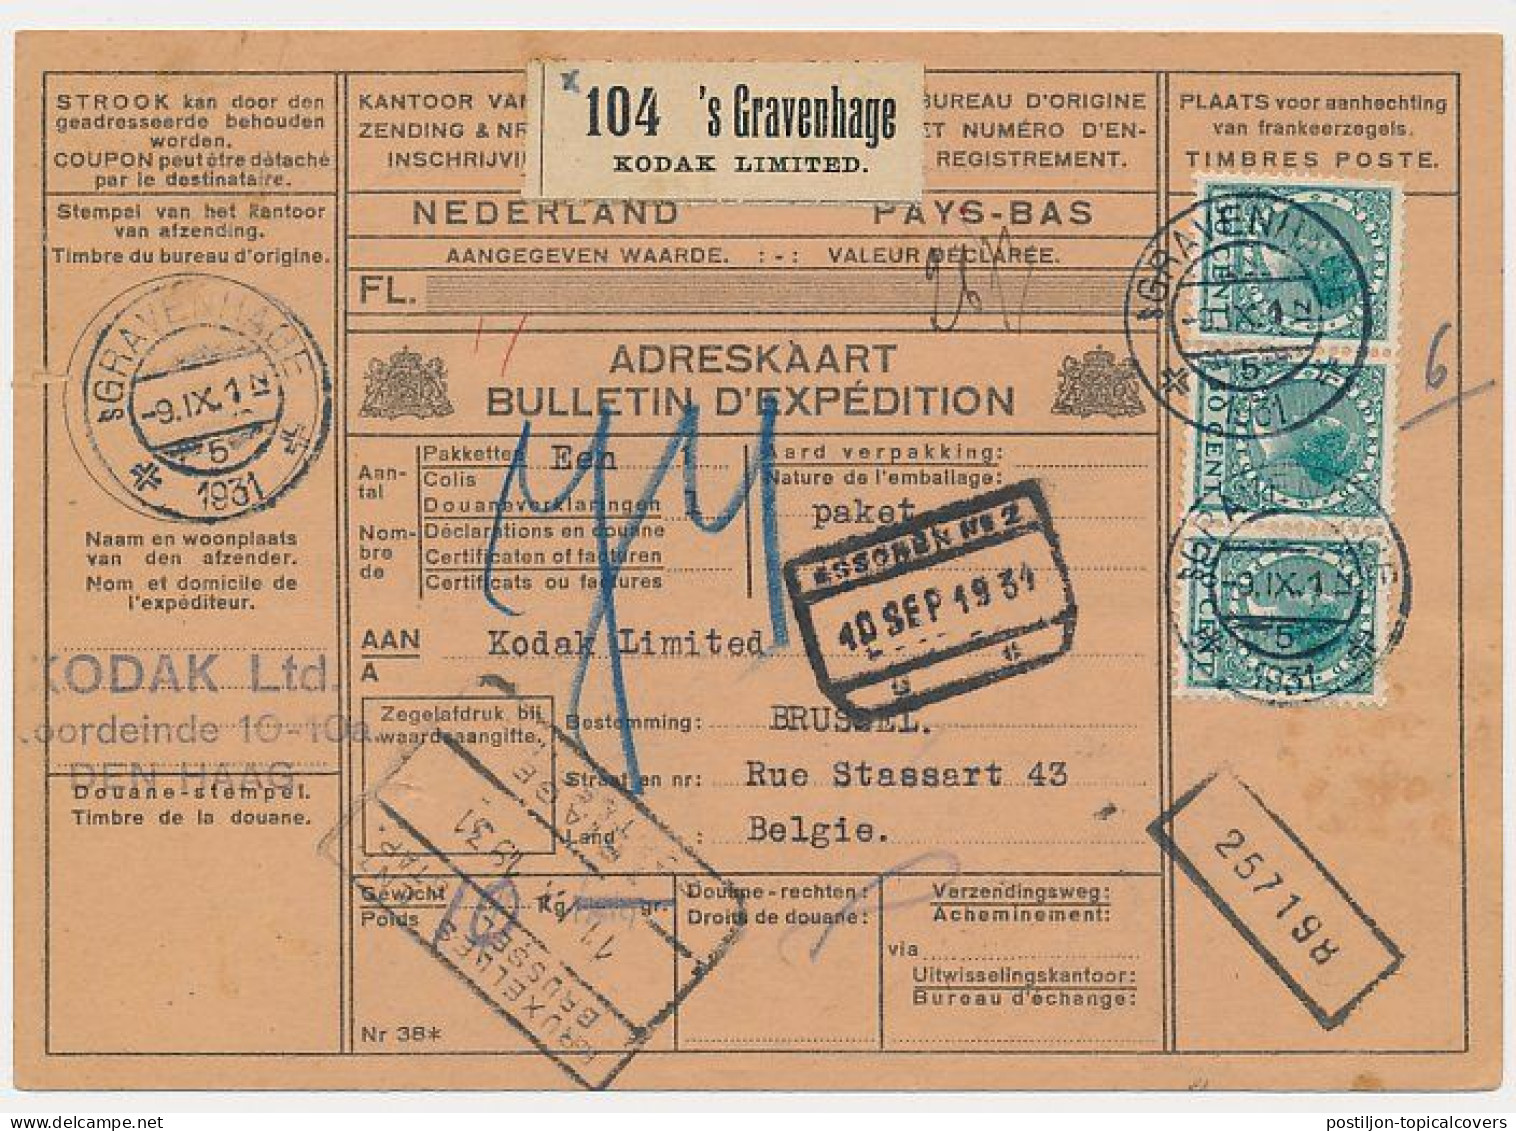 KODAK LIMITED - Rare Private Postal Label - Address / Package Card The Netherlands 1931 - Photography - Photographie